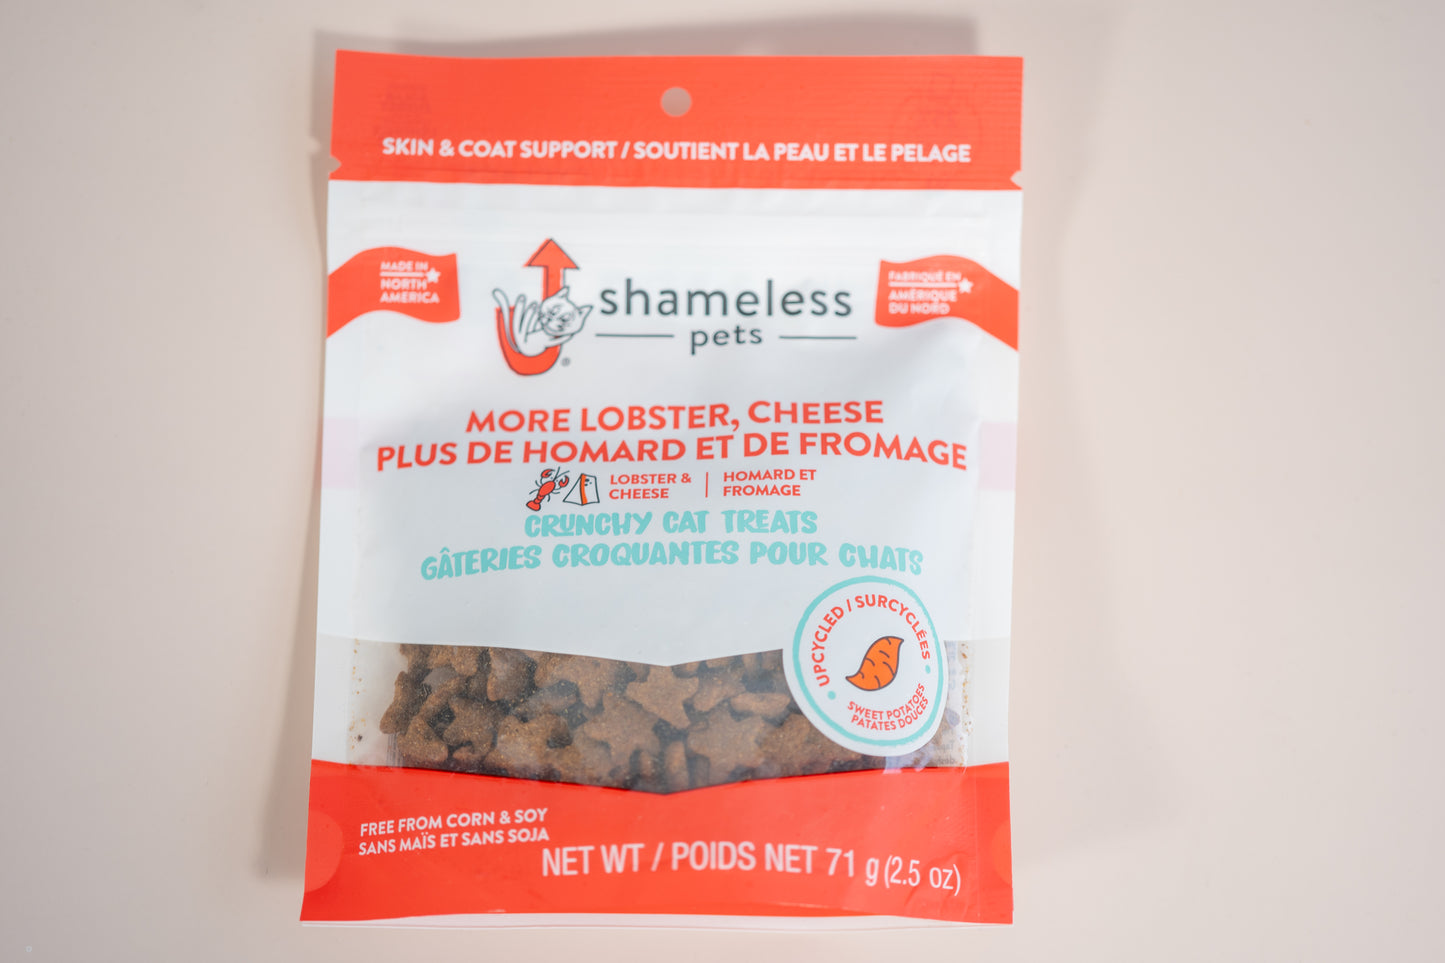 Shameless Pets More Lobster, Cheese are packed with pre and probiotics for a digestive support.